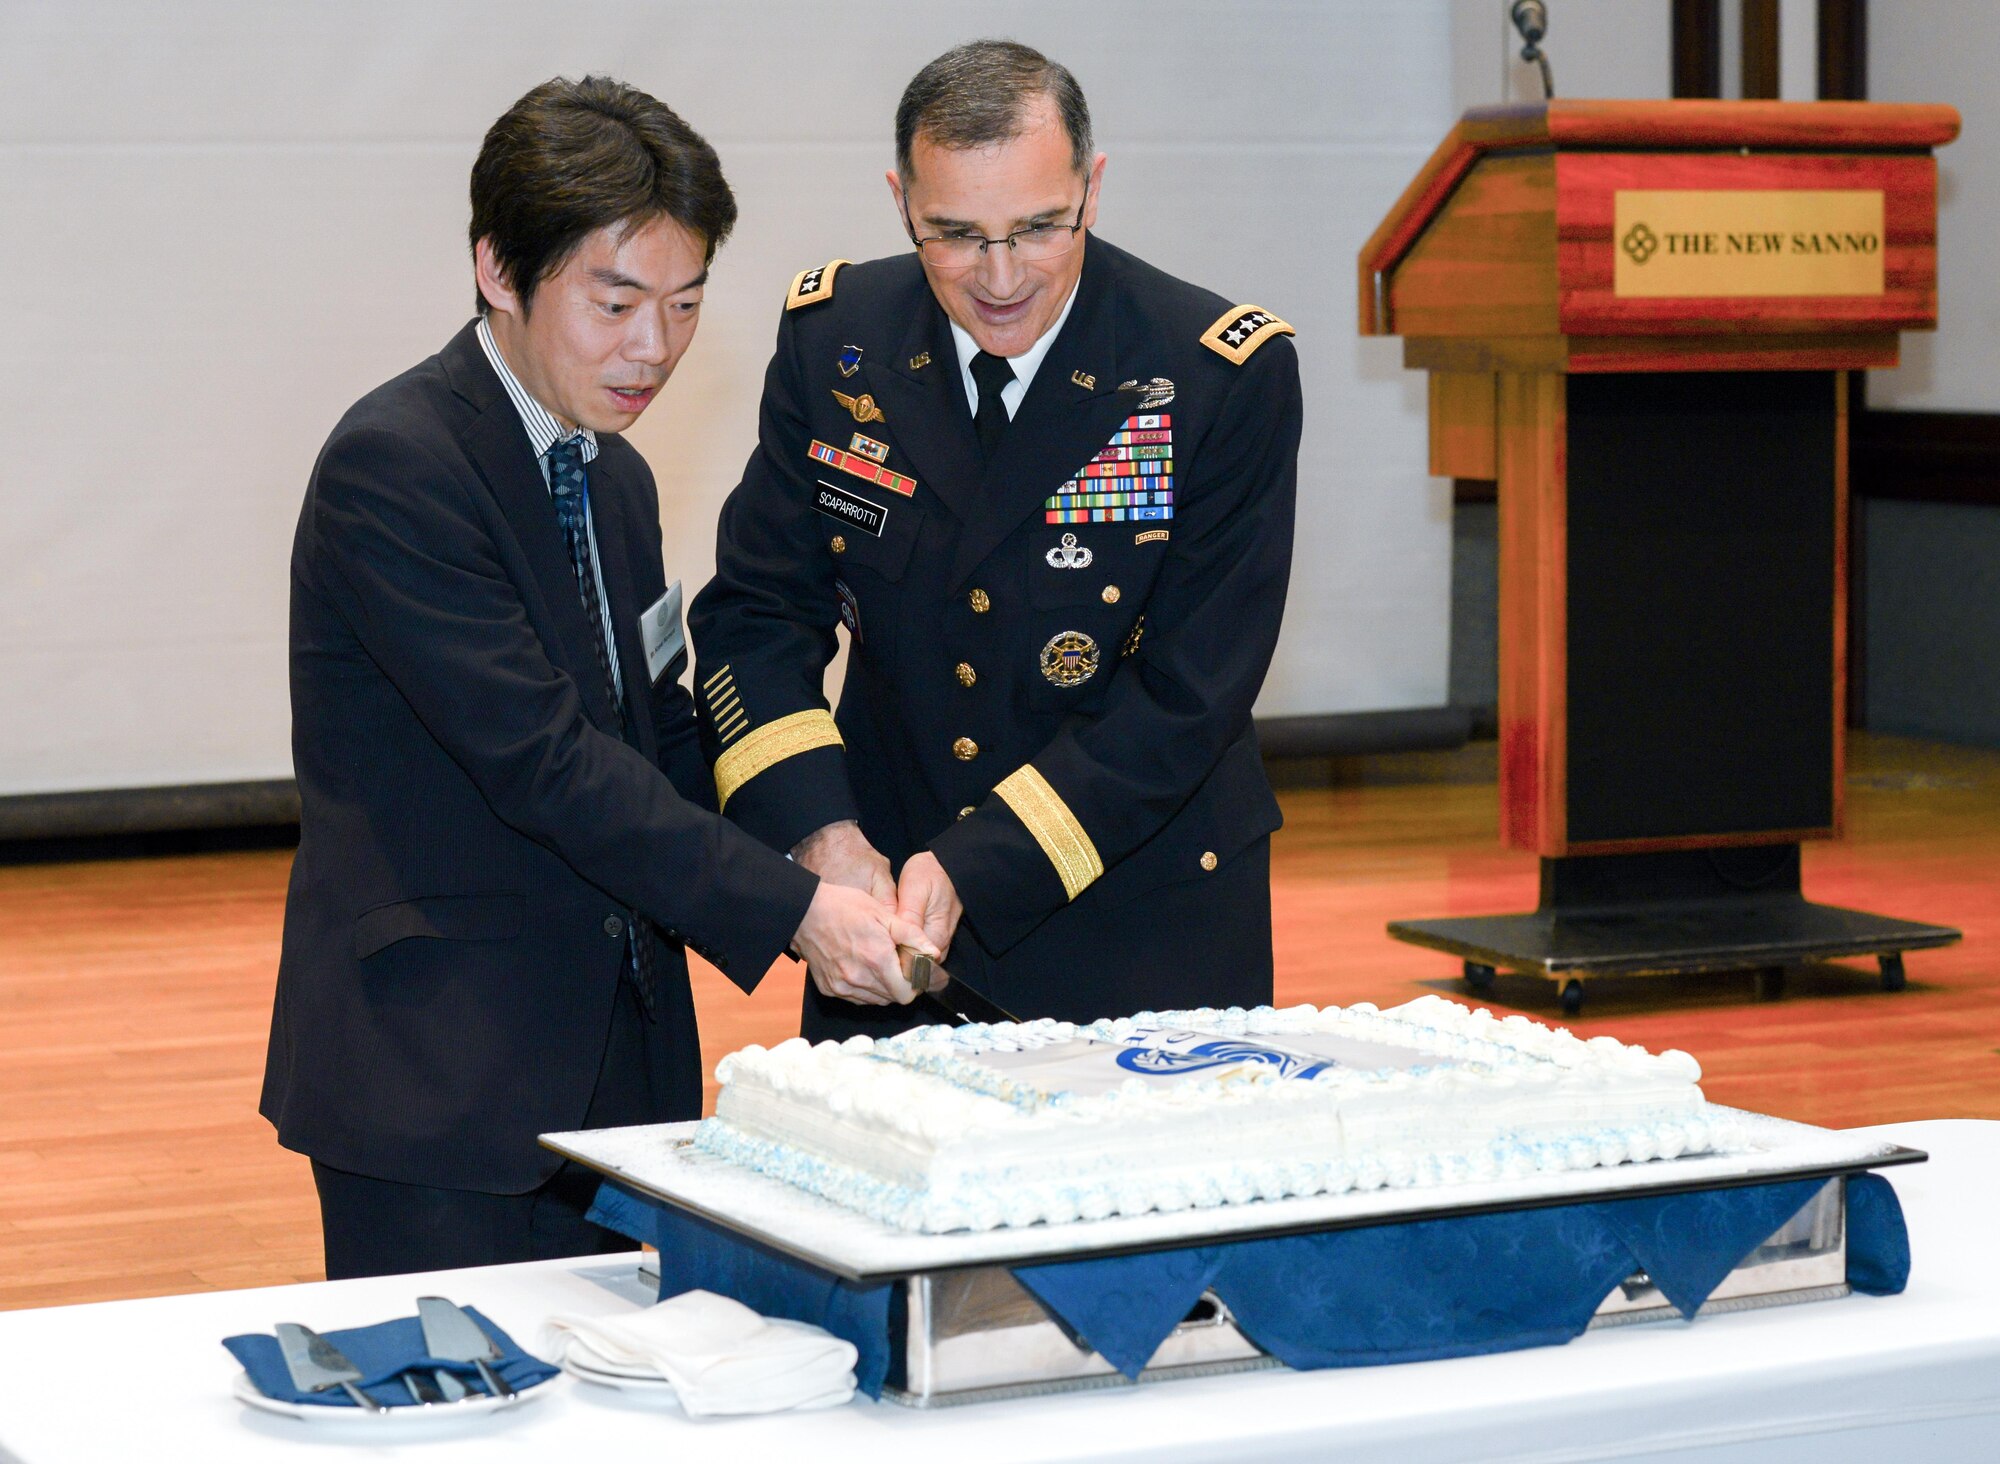 Gen. Michael Scaparrotti, United Nations Command commander, right, and a UN reception attendee, left, cut a cake during the UN Day 70th Anniversary Celebration in Tokyo, Japan, Nov. 16, 2015. The day provides an opportunity for the UNC, a unified command structure for the multinational military forces supporting South Korea, to show its appreciation for the ongoing support from sending states, supporting organizations and Japan, and to reinforce the value to regional security and stability. Attendees include ambassadors, diplomats, members of the Japanese Ministry of Foreign Affairs and Ministry of Defense, Japanese Self-Defense Forces and United States Forces, Japan, senior military officers. (U.S. Air Force photo by Airman 1st Class Elizabeth Baker/Released)